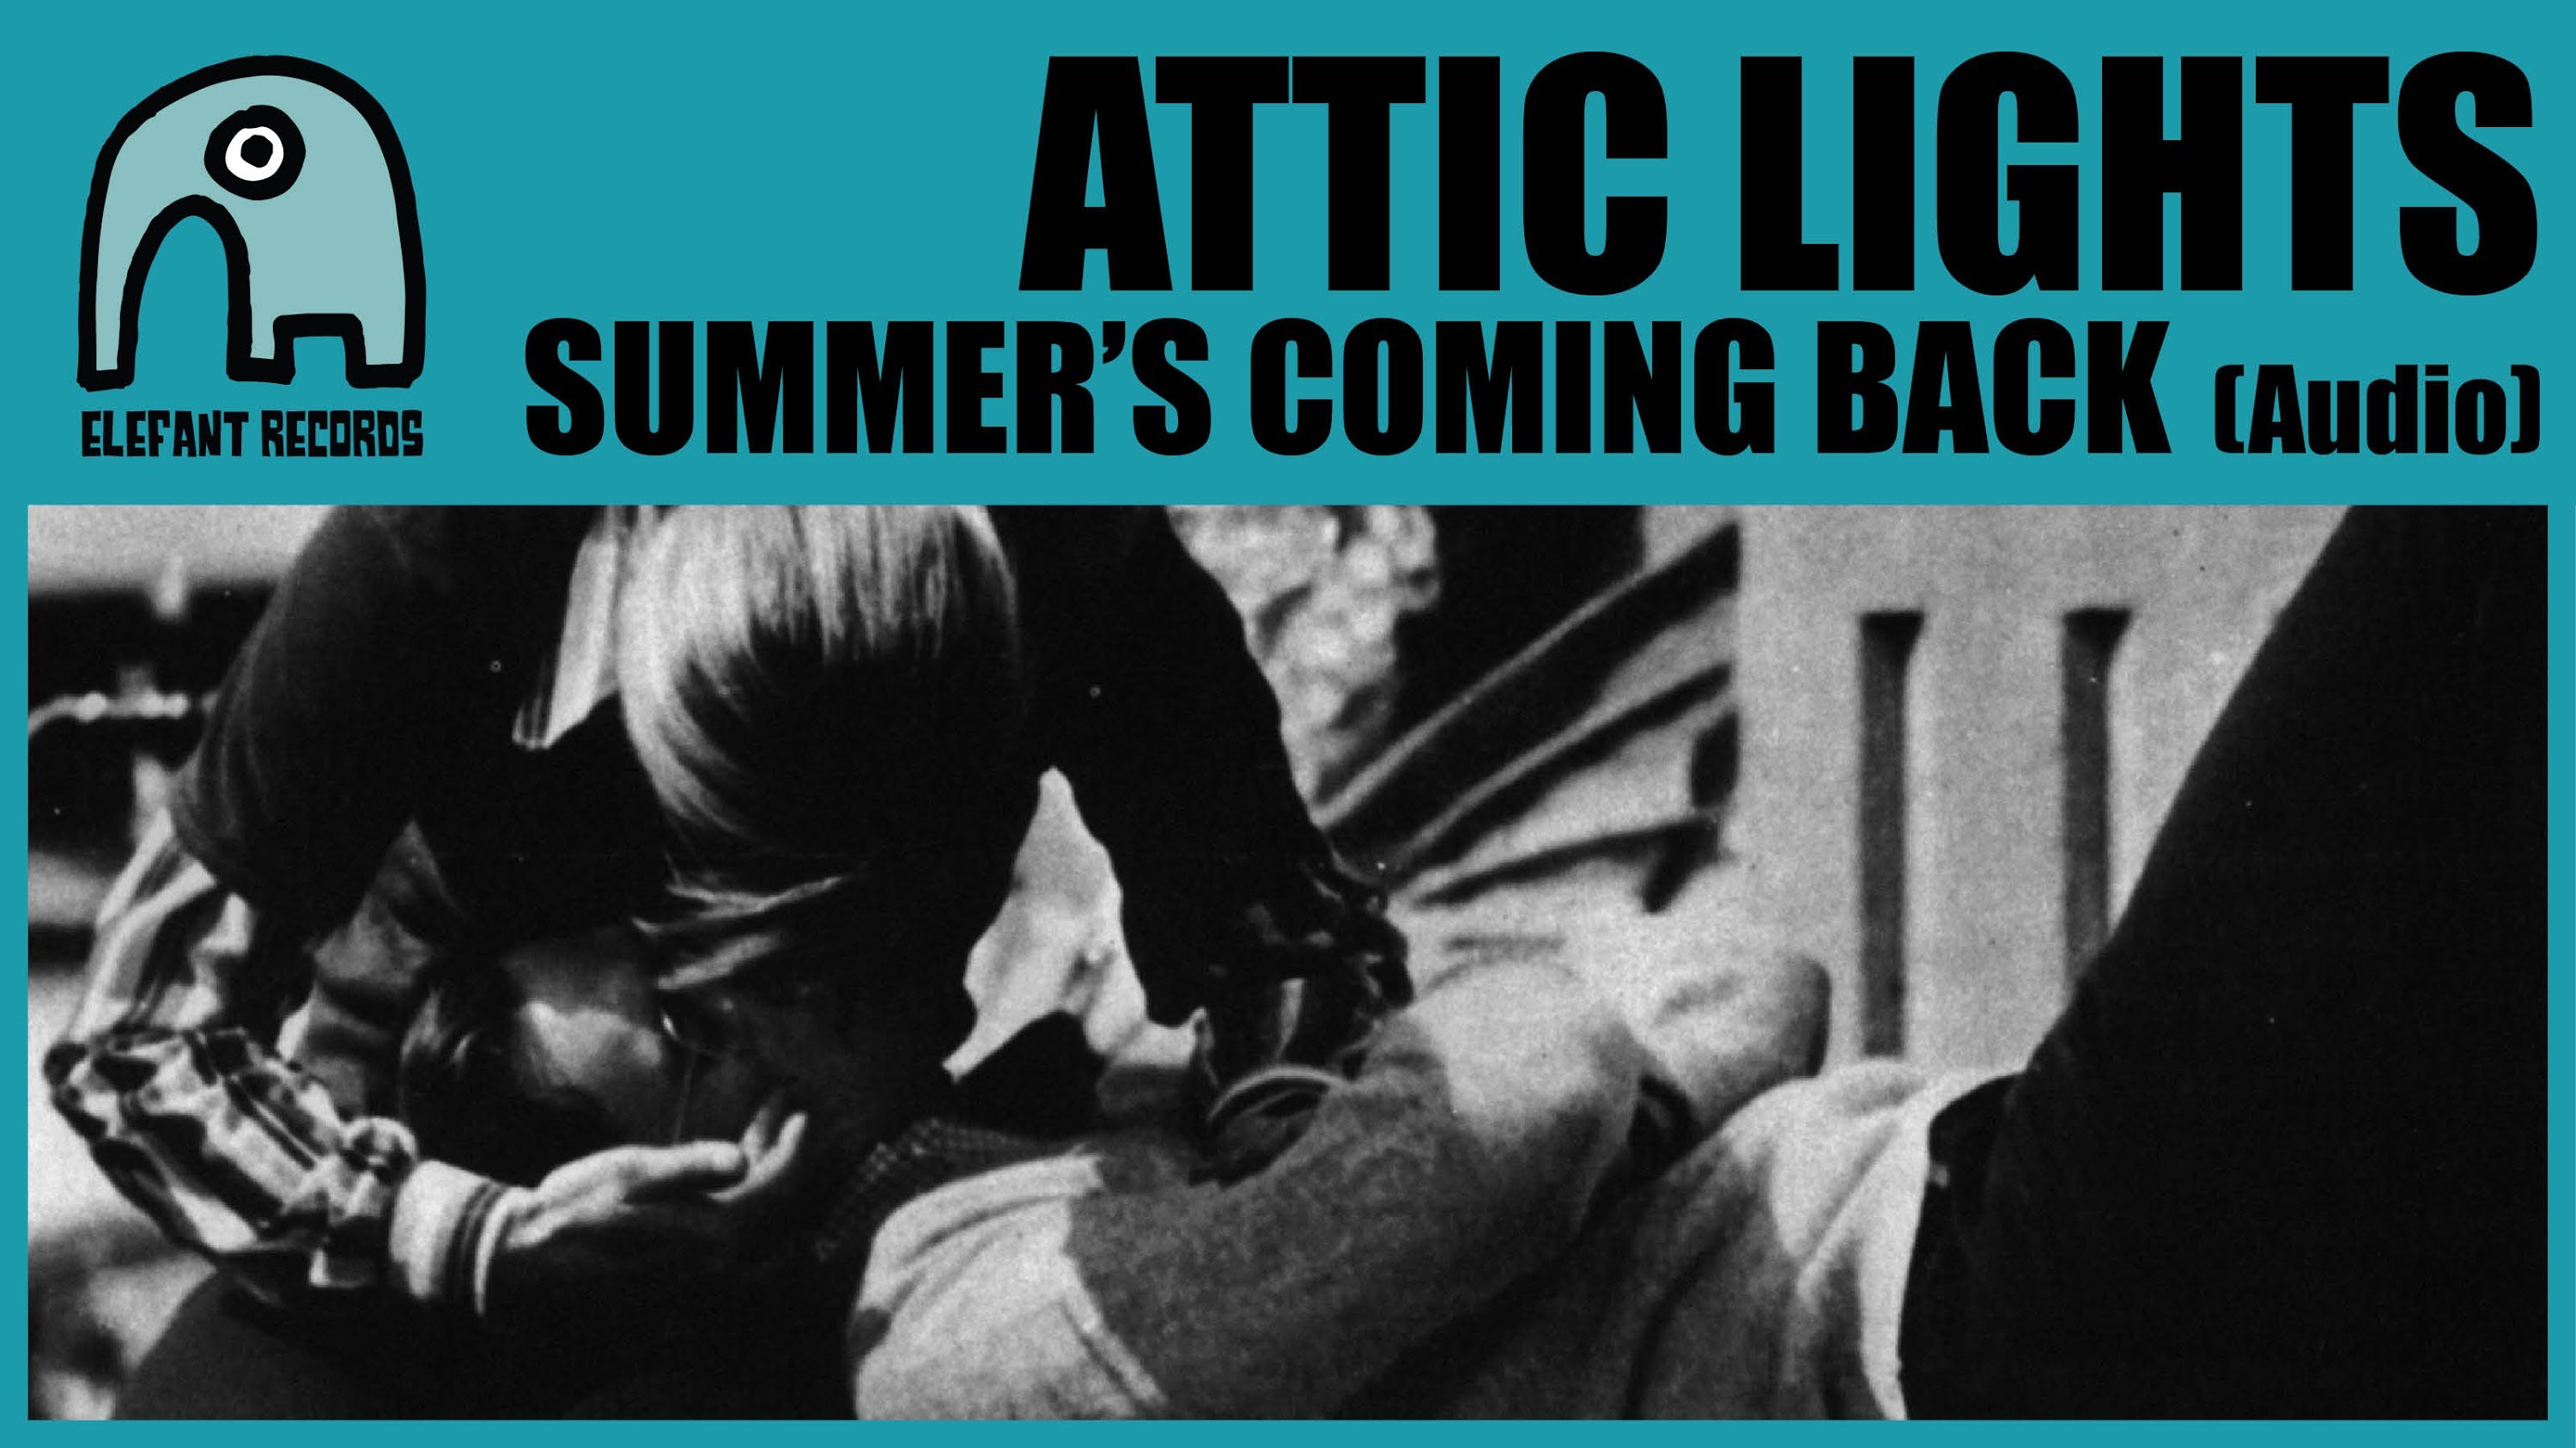 ATTIC LIGHTS - Summer's Coming Back [Audio] - YouTube